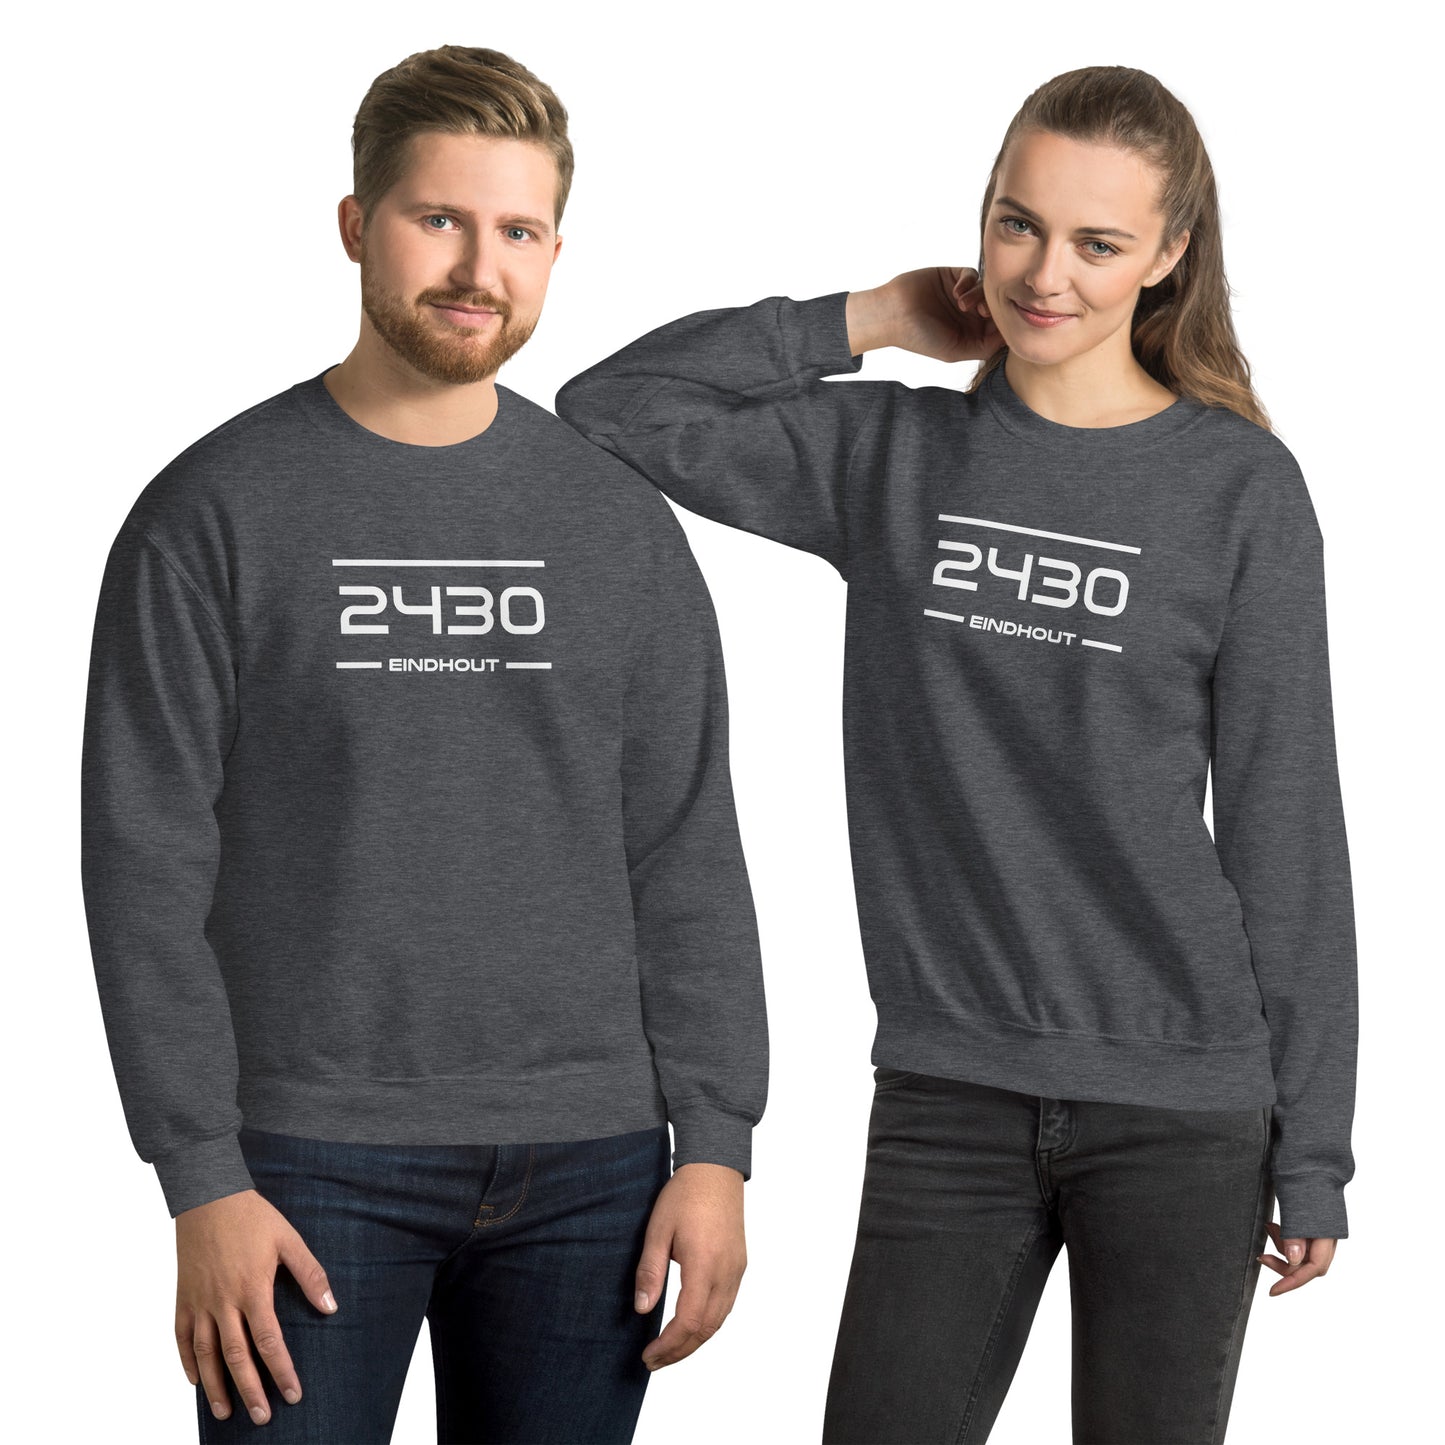 Sweater - 2430 - Eindhout (M/V)